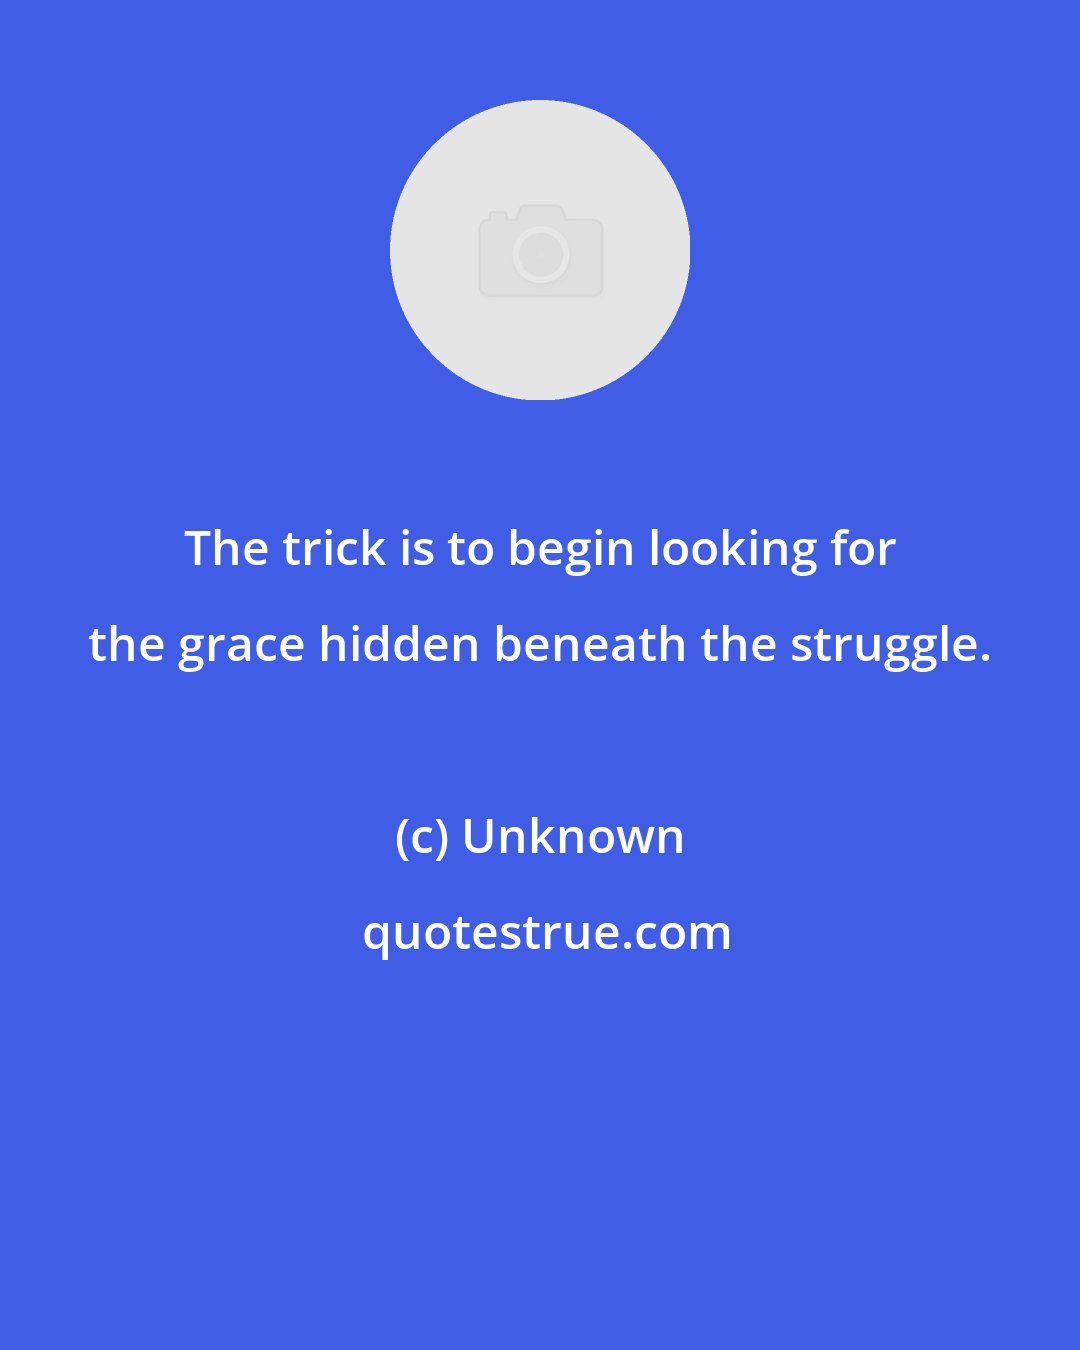 Unknown: The trick is to begin looking for the grace hidden beneath the struggle.